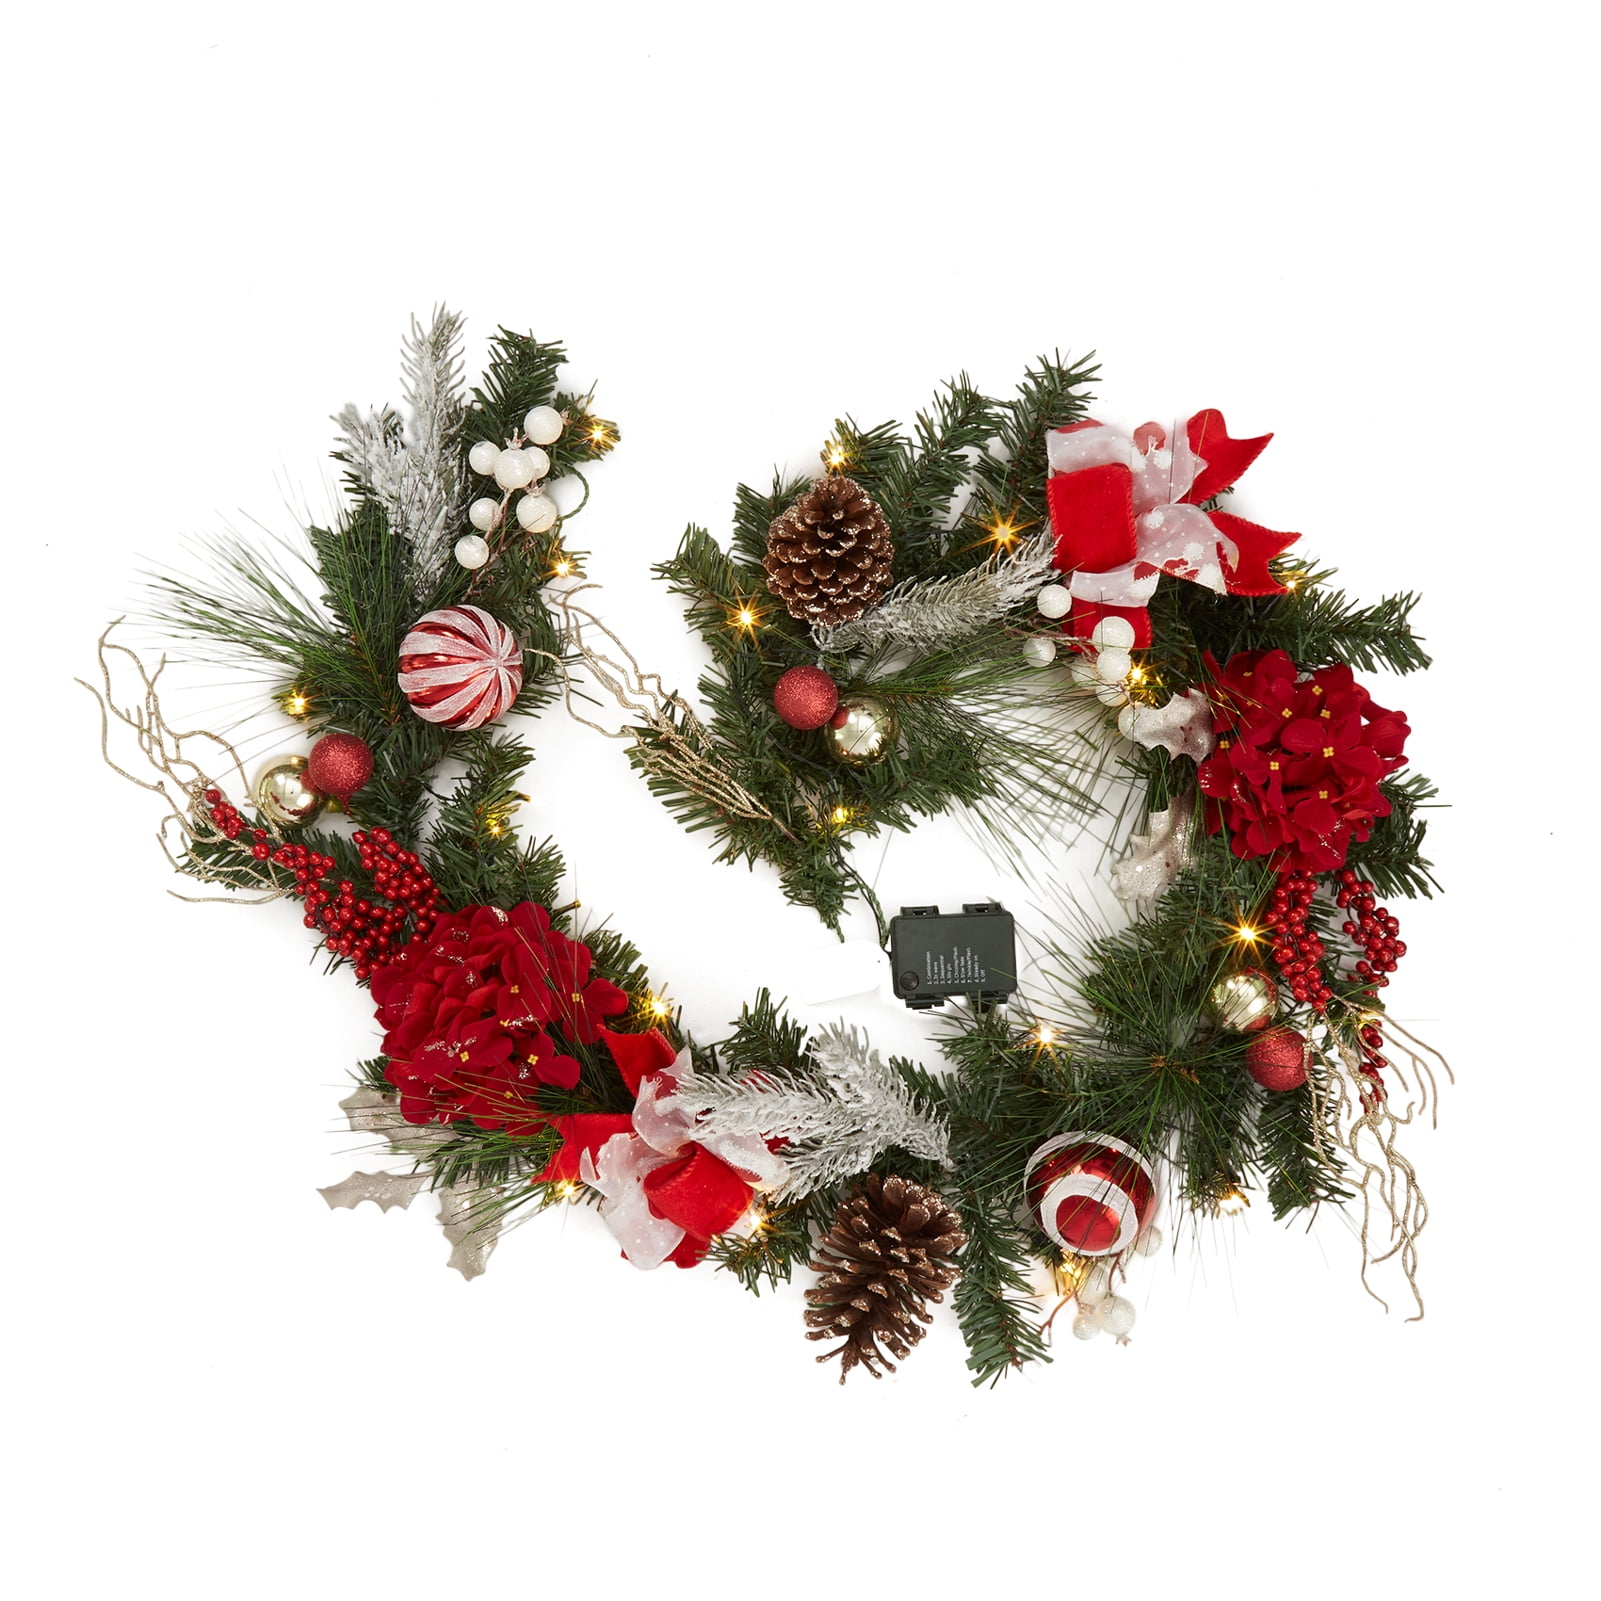 WhizMax 6 FT Christmas Garland with Lights, Pre-lit Outdoor Garland ...